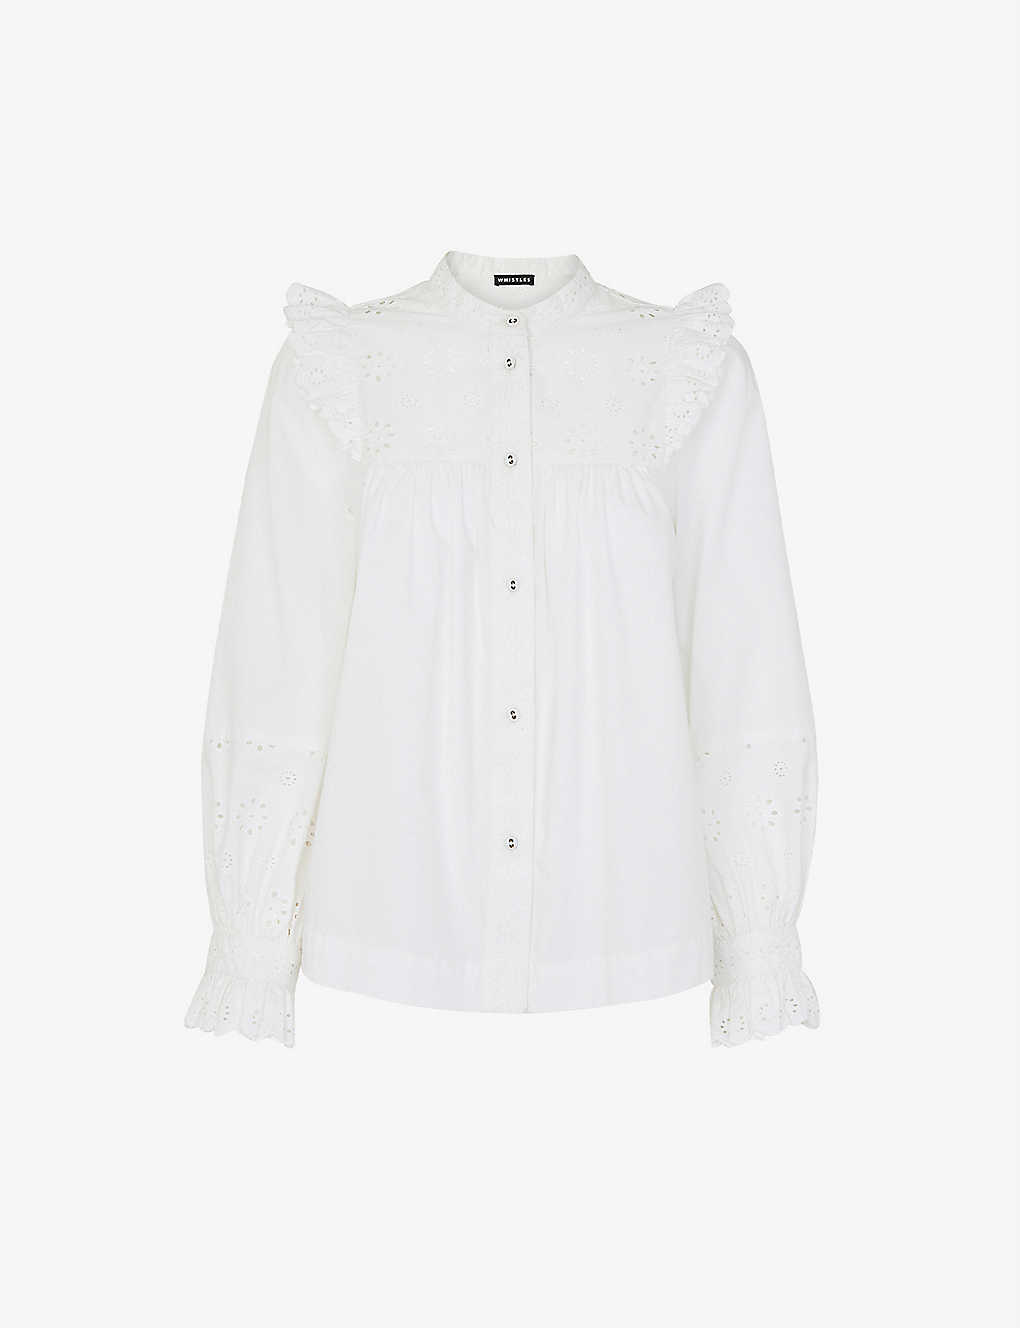 Whistles Womens White Broderie-detail Frill-sleeve Cotton Top